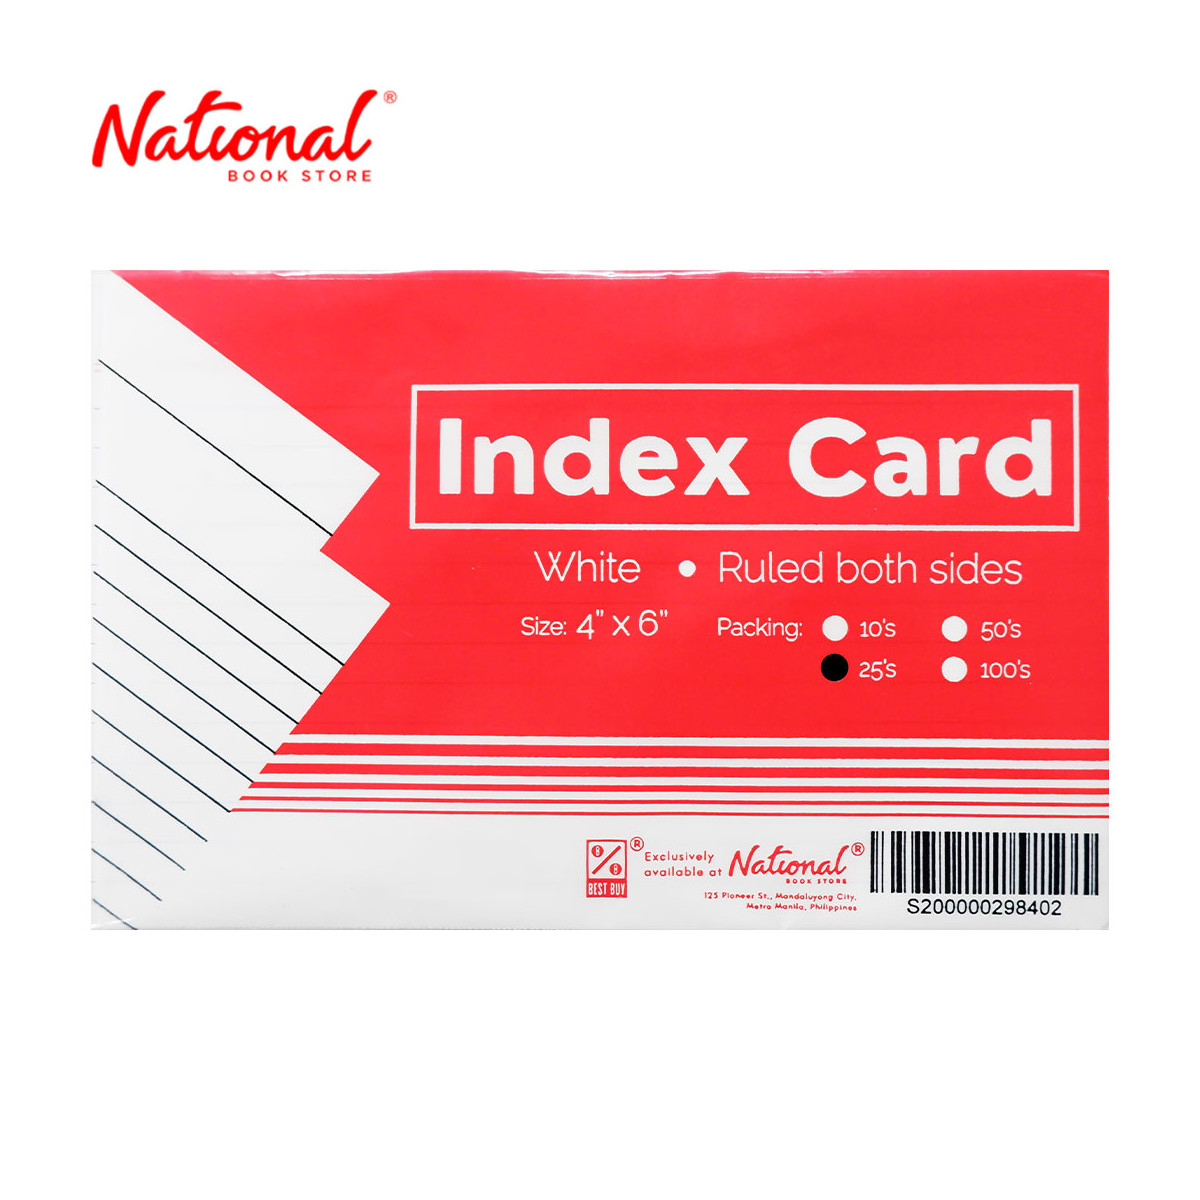 Best Buy Index Card White 4x6 25's Ruled Both Sides - School & Office Supplies